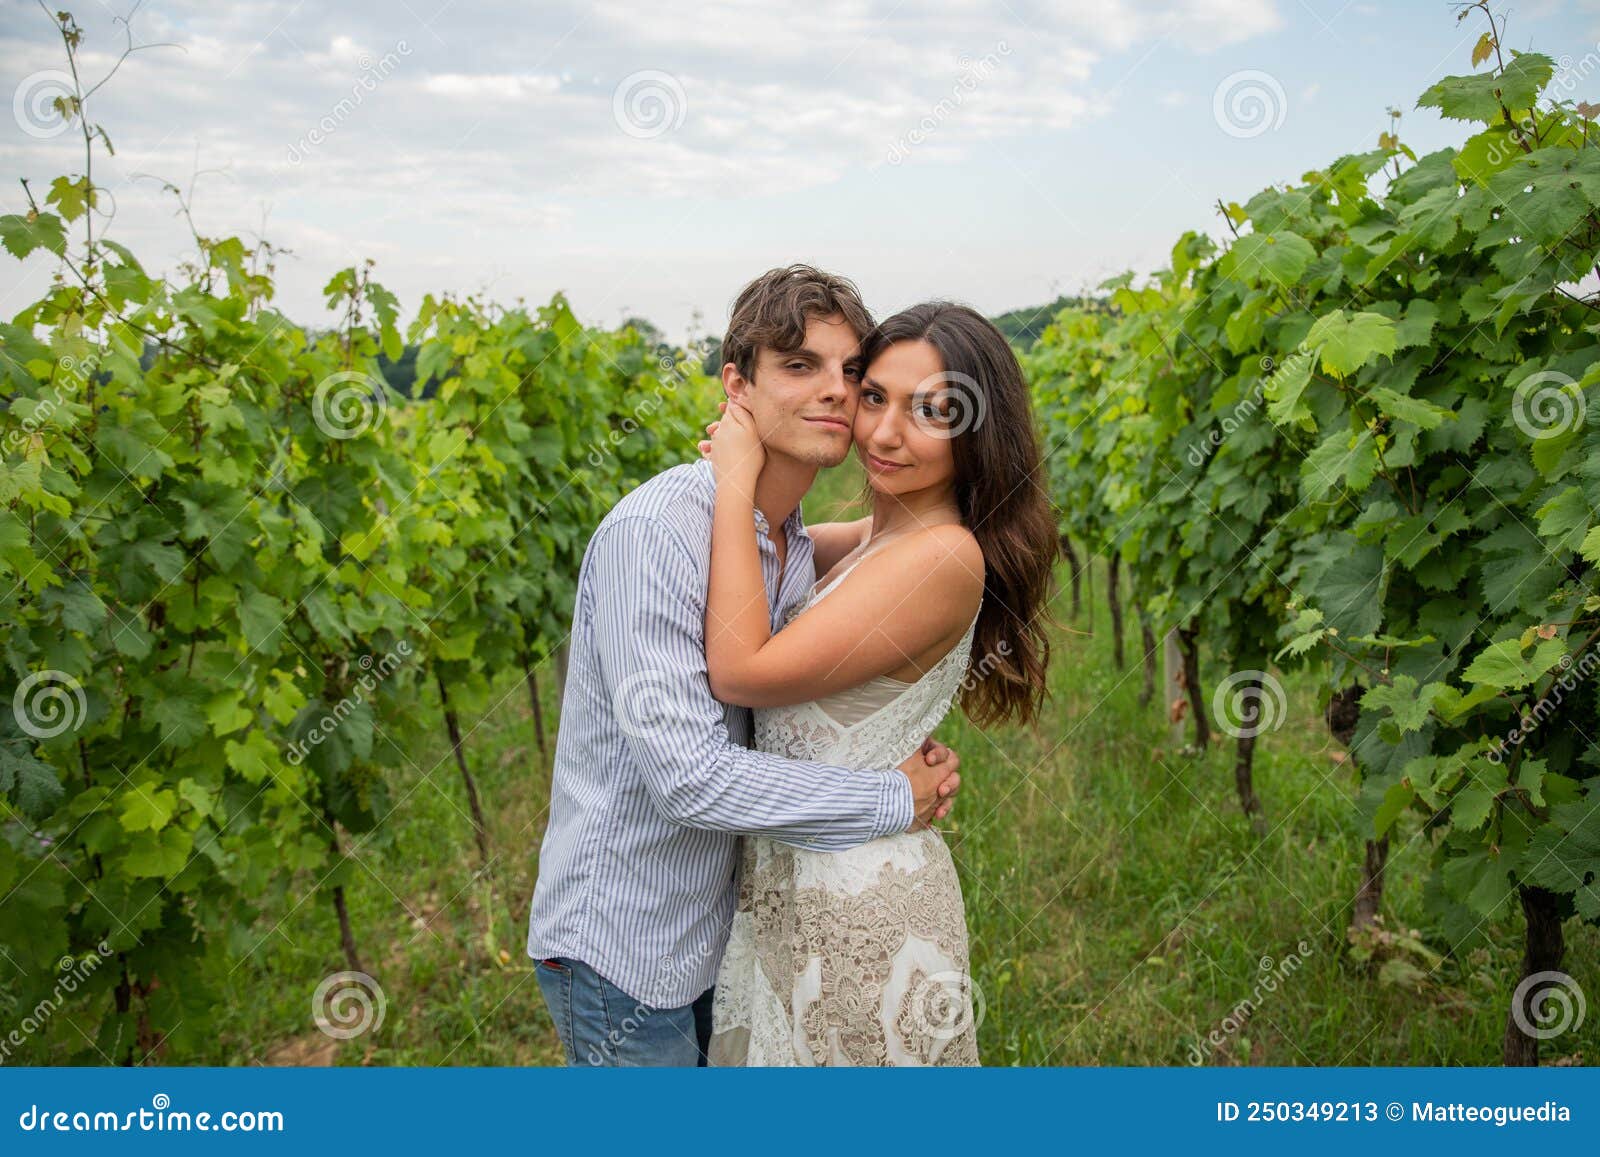 boy and girl in love look smilingly at the photographer who portrays them in the midst of the vineyards